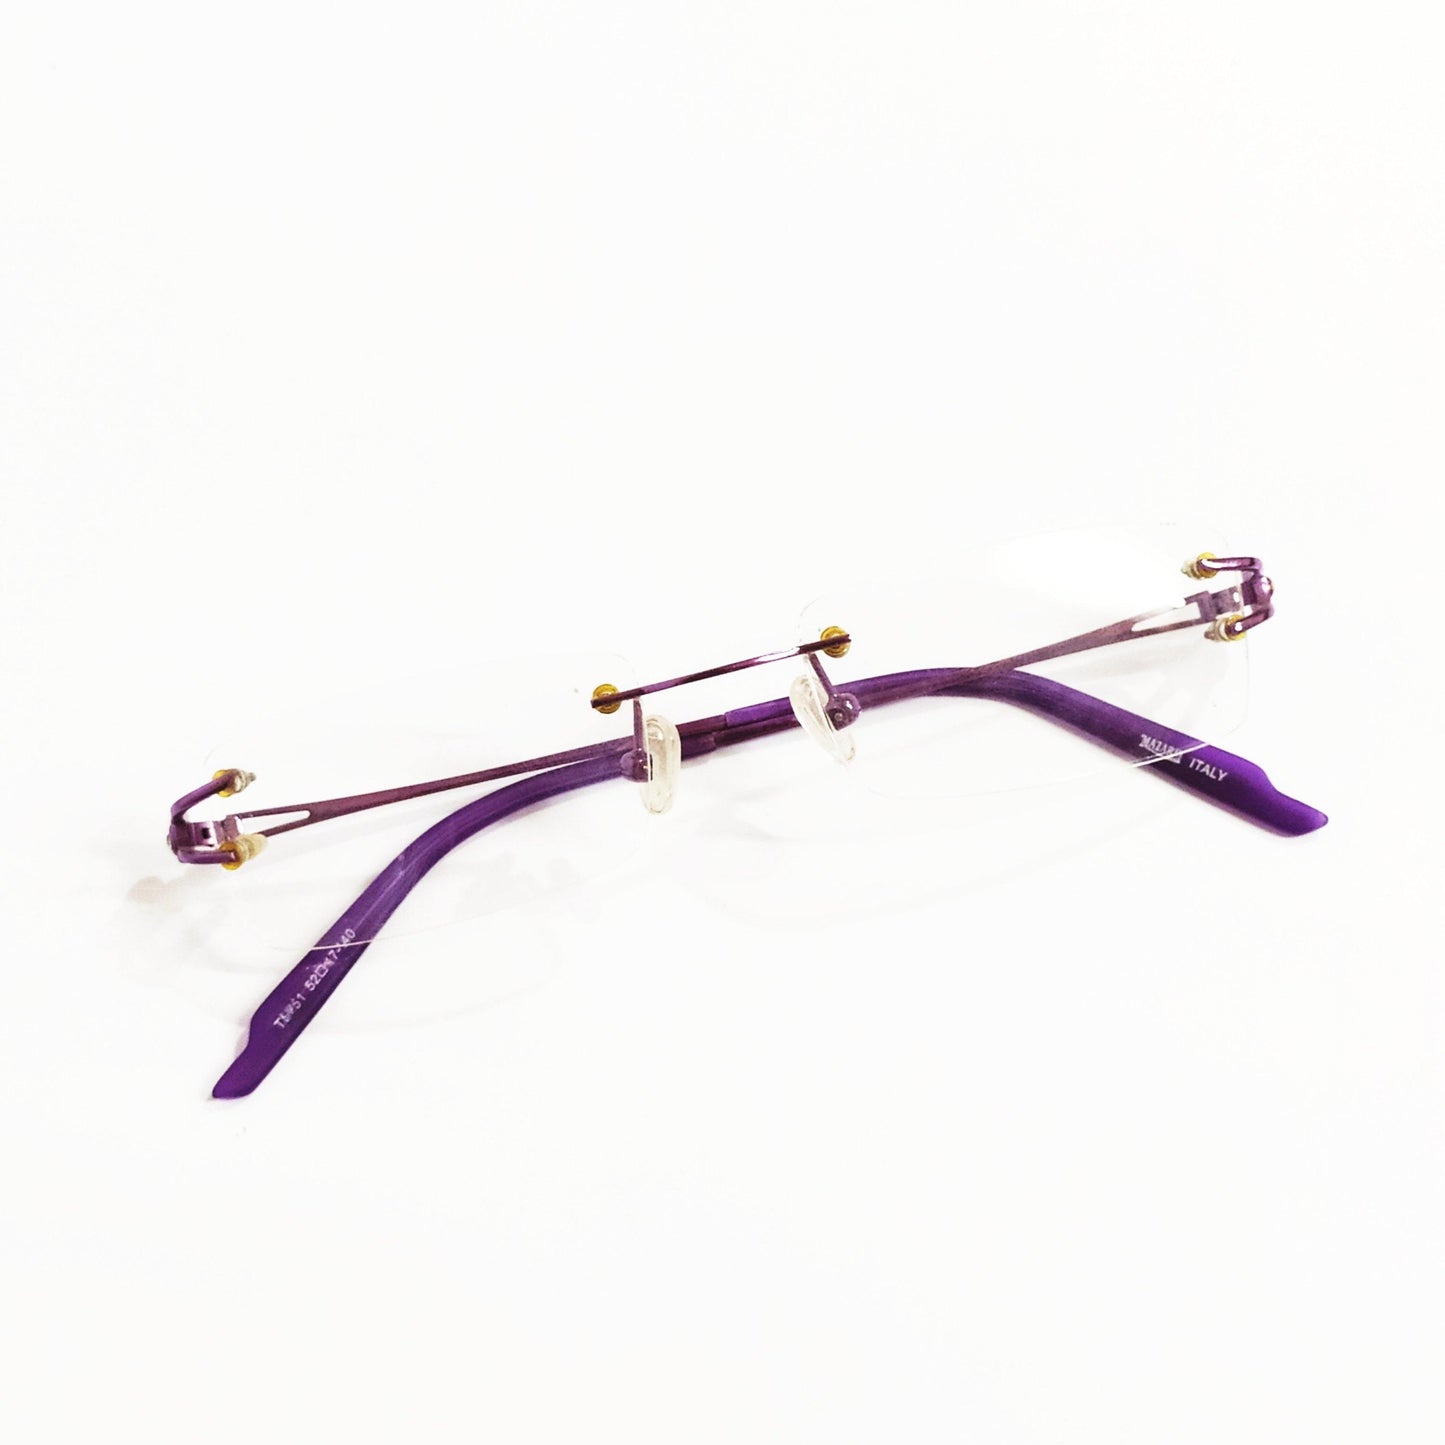 Buy Premium Rimless Computer Glasses with Anti Glare Coating WlTS951 - Glasses India Online in India